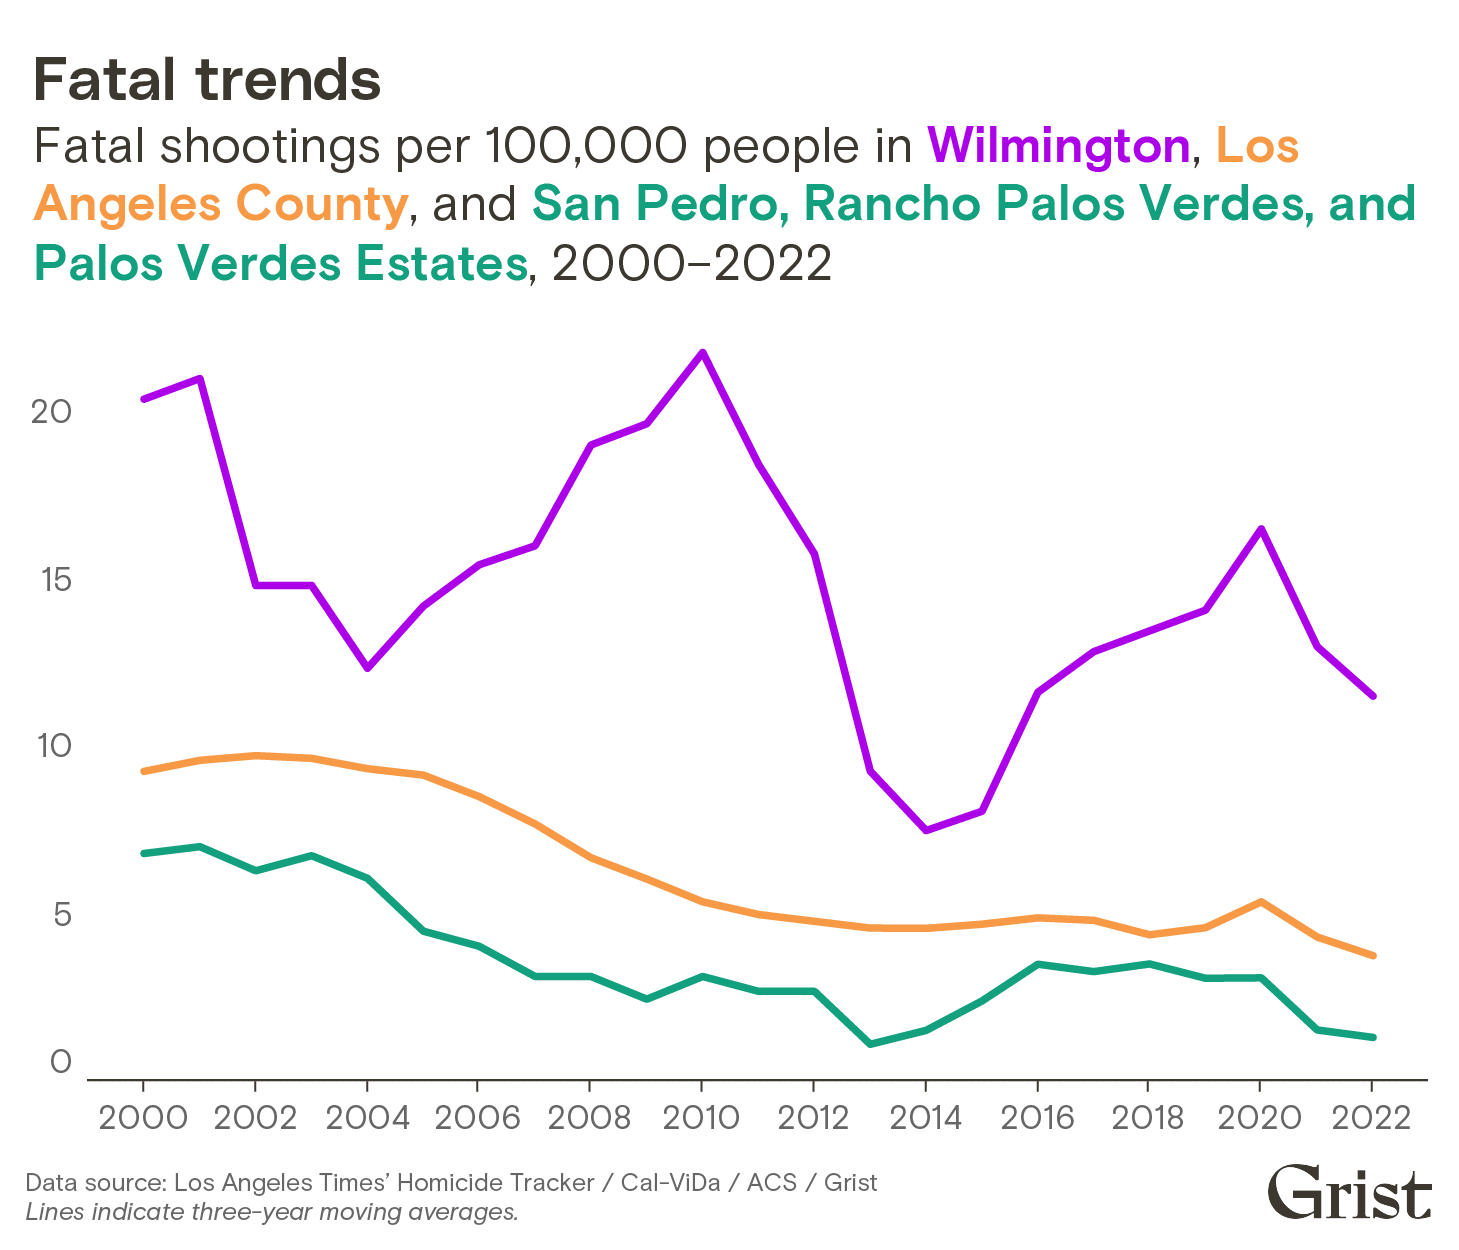 A line chart showing fatal shootings per 100,000 people from 2000–2022 in three areas: Wilmington, Los Angeles County, and San Pedro, Rancho Palos Verdes, and Palos Verdes Estates (combined). Shooting rates are highest in Wilmington.